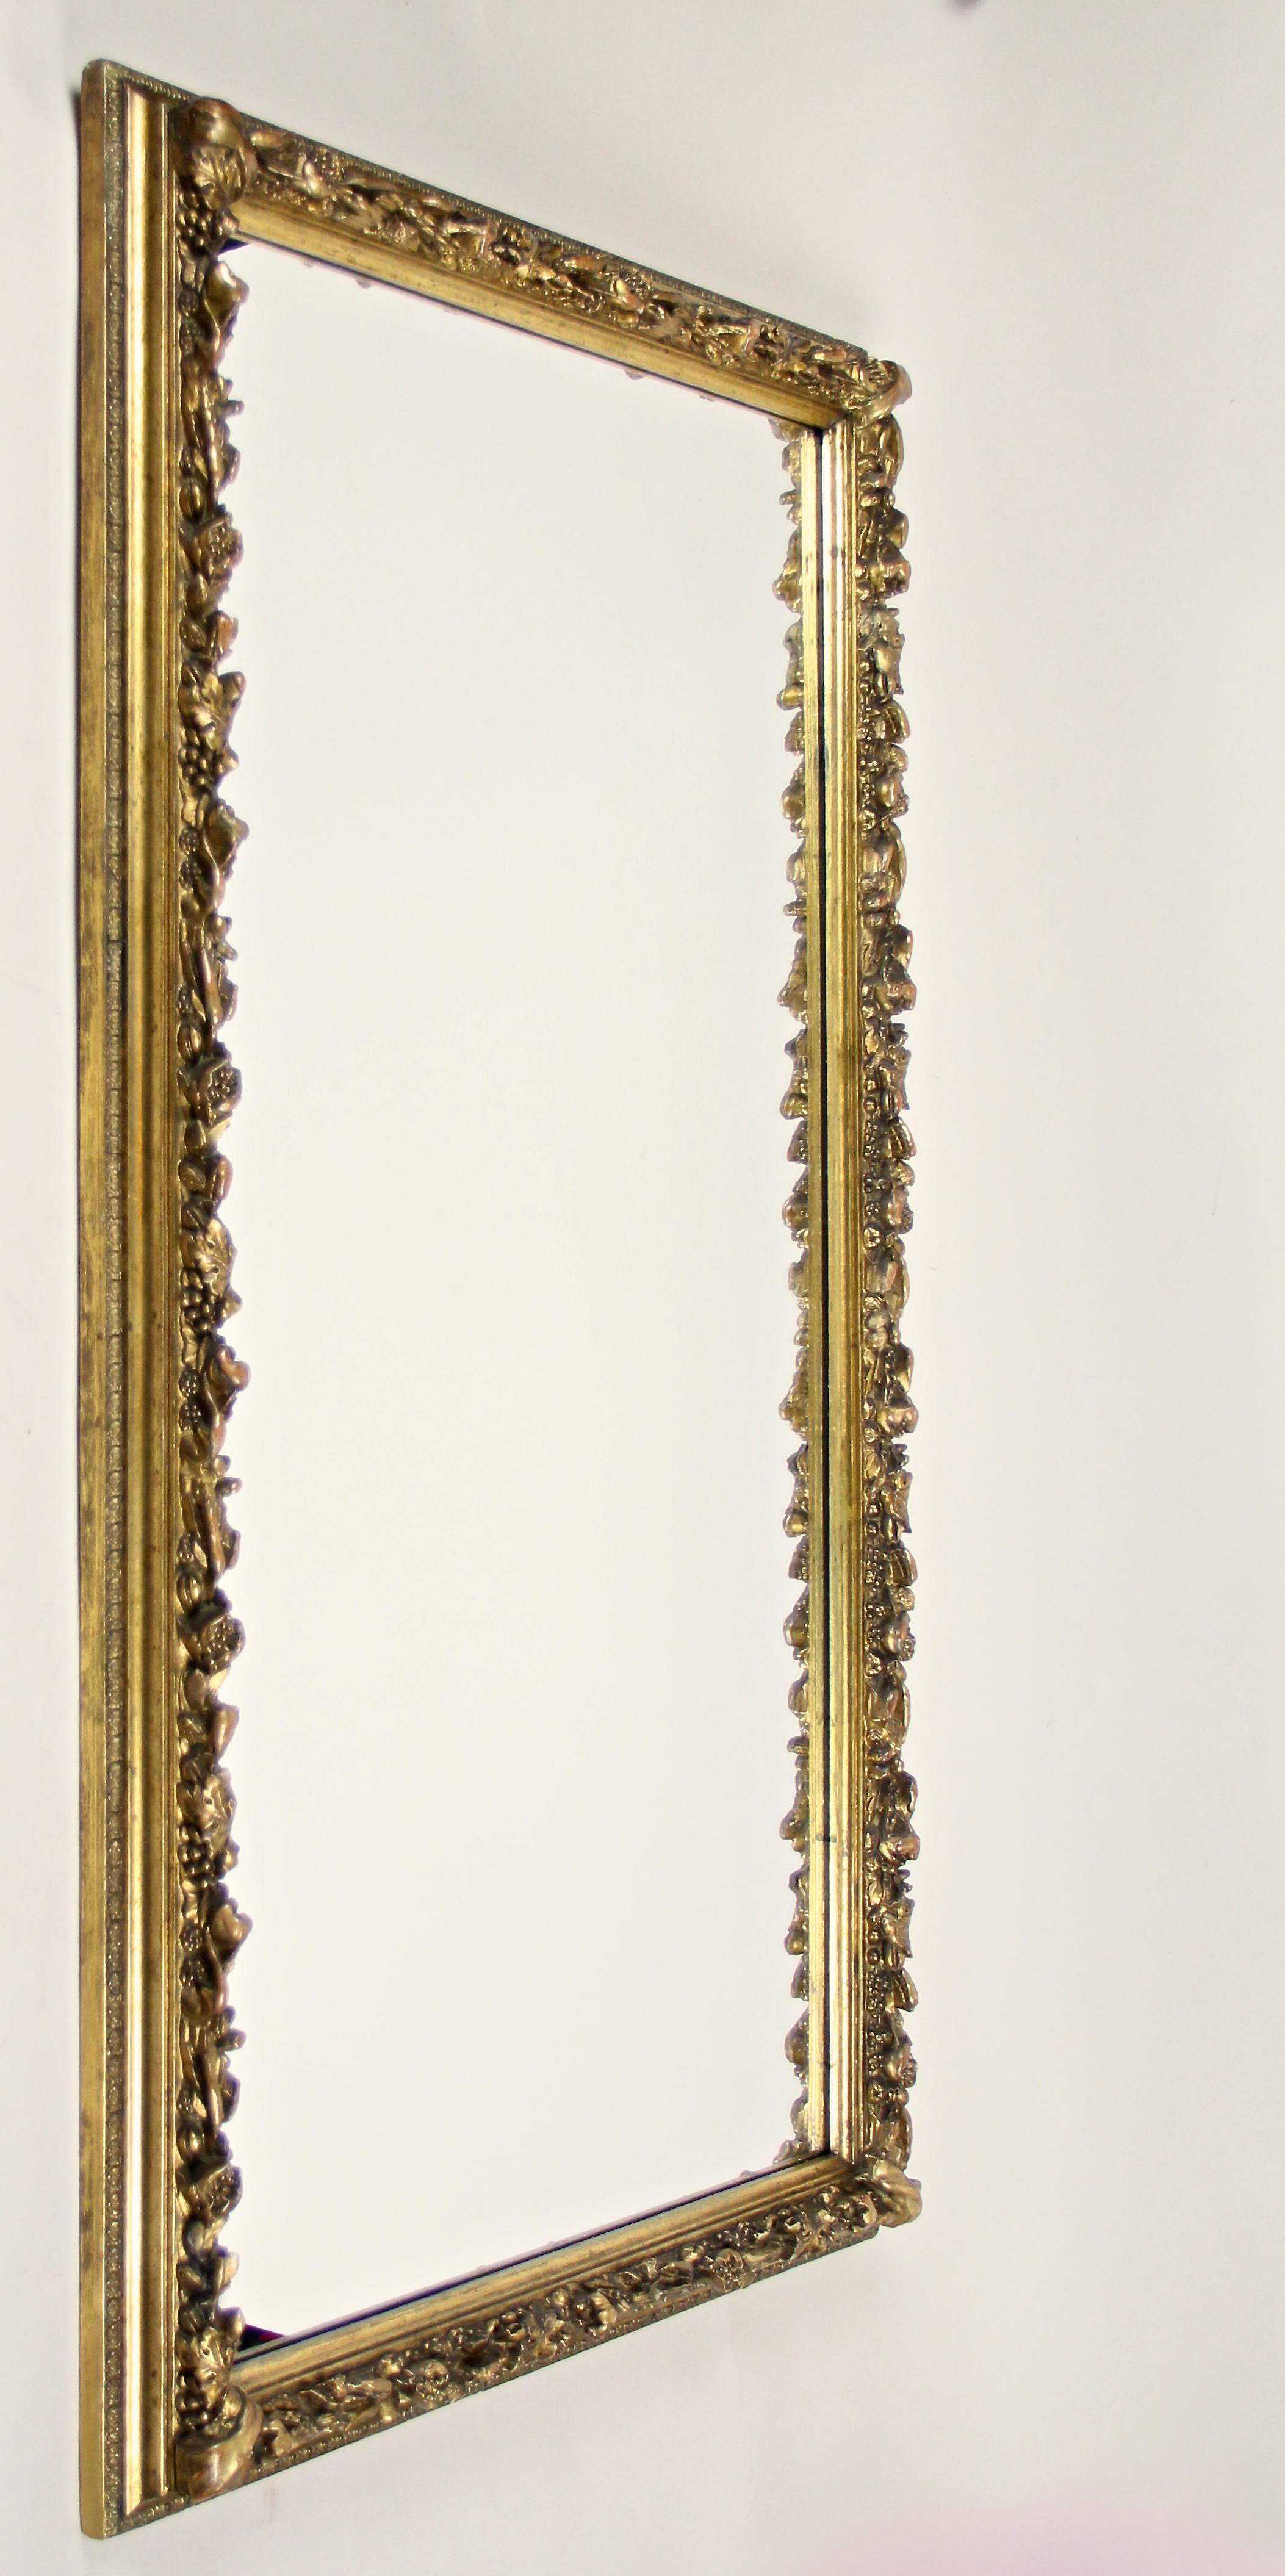 Ravishing floral gilt Biedermeier wall mirror from the 19th century in Austria, circa 1840. This artfully processed large golden wall mirror shows elaborately done stucco works depicting different kinds of fruits and foliage. Gilt with different